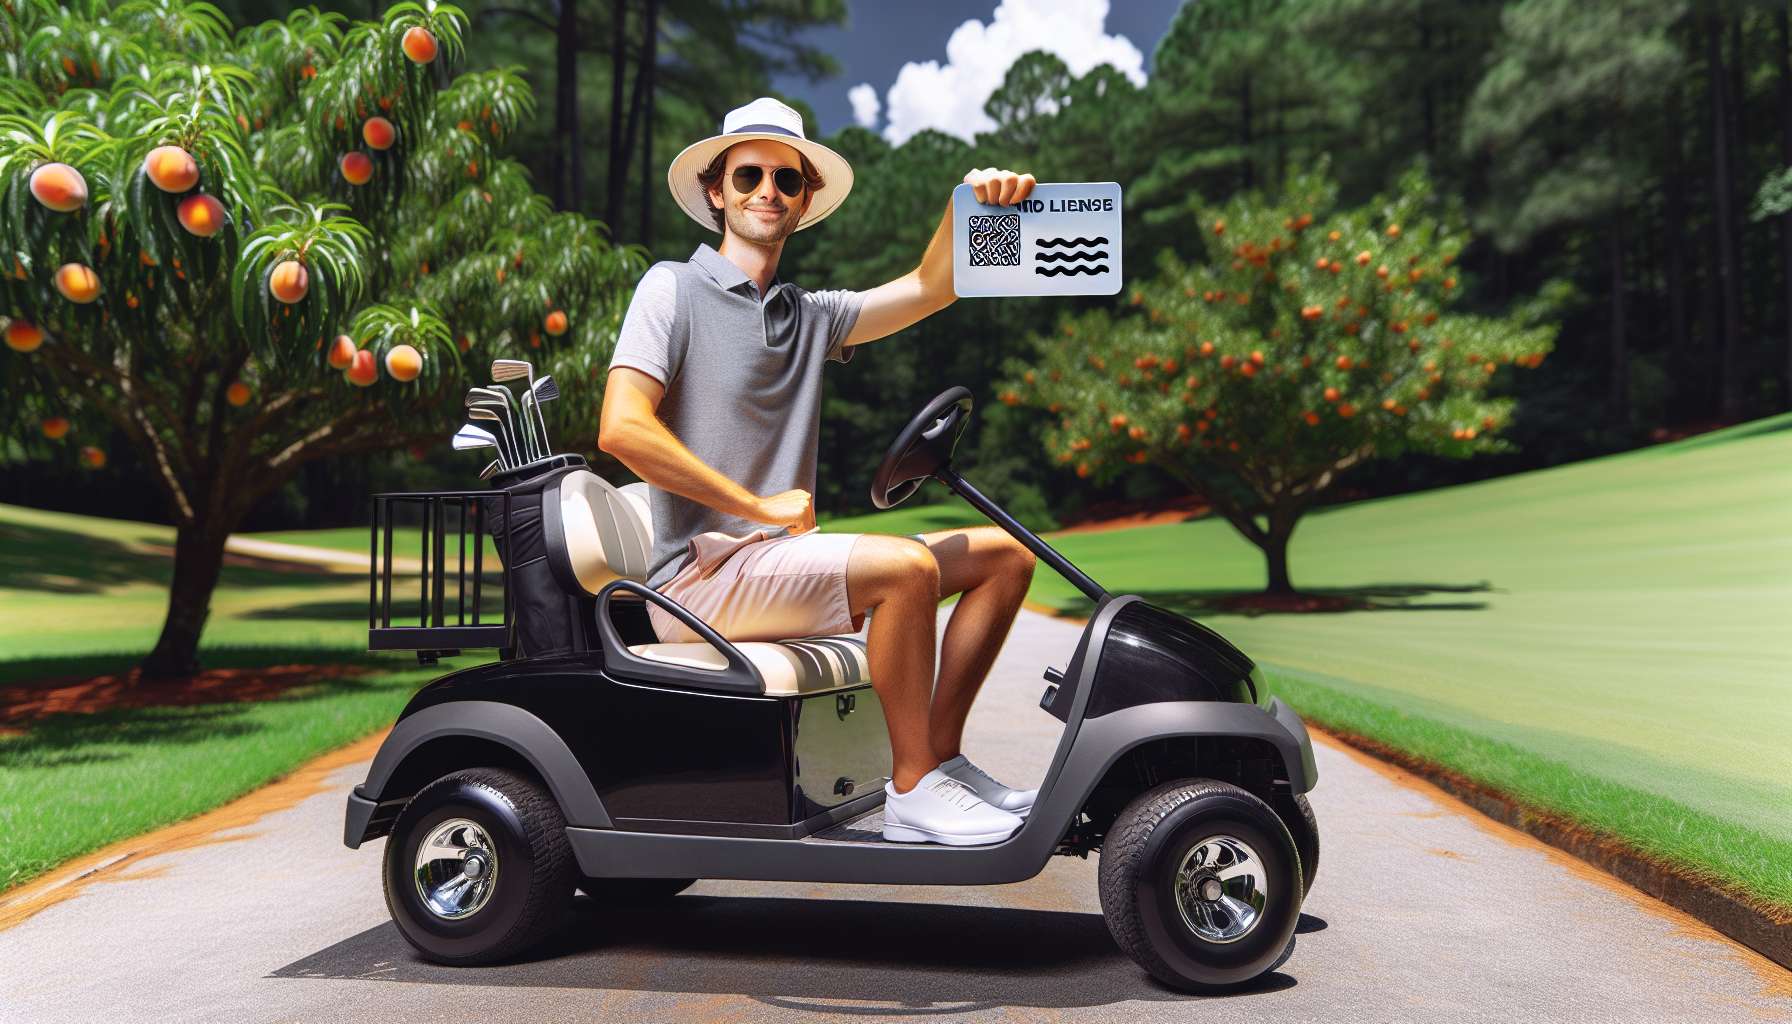 Golf cart driver with a valid license in Georgia